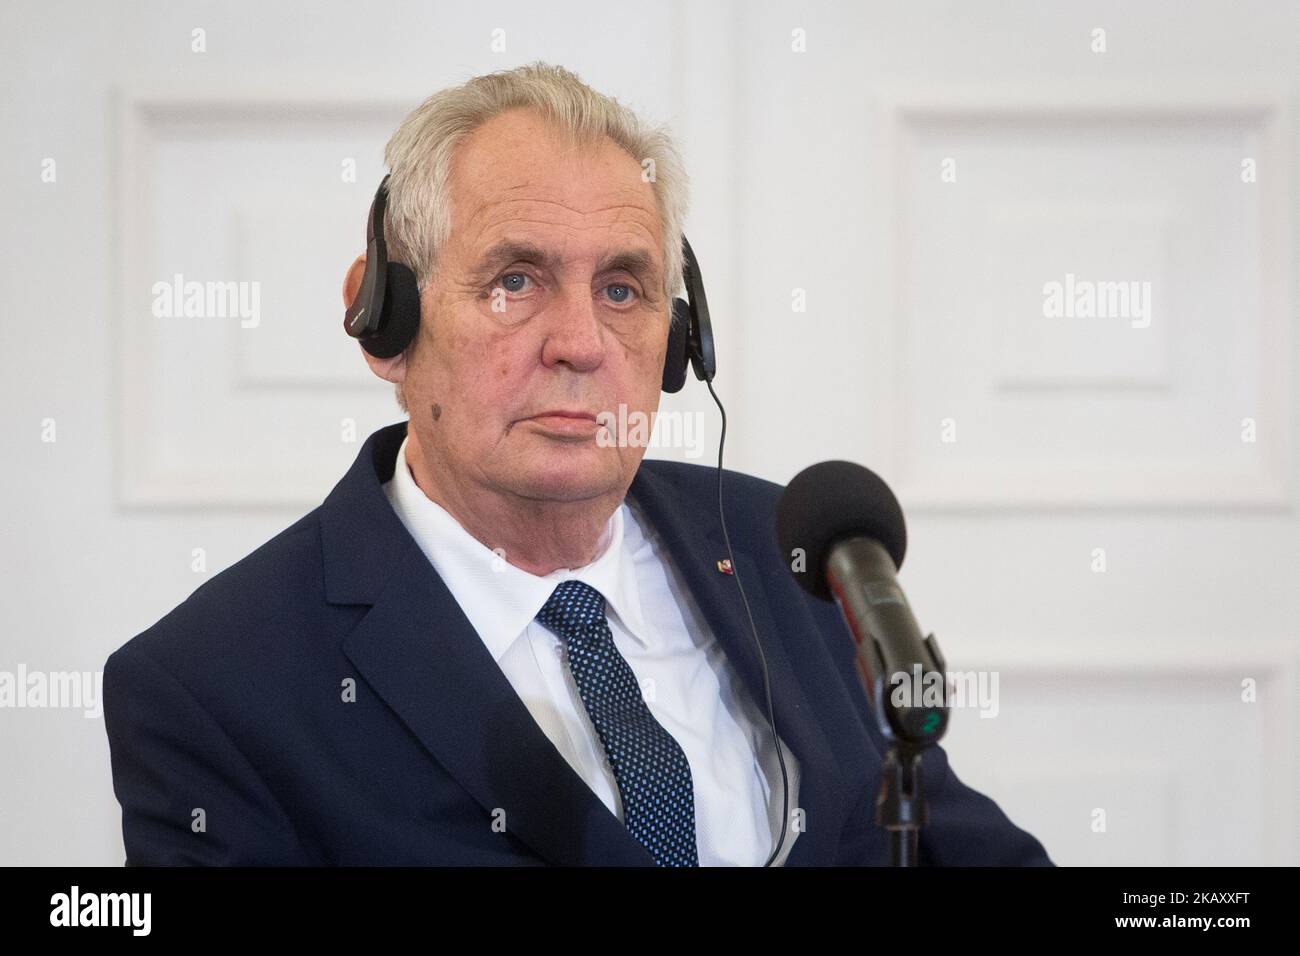 President of the Czech Republic Milos Zeman during the press conference with President of Poland Andrzej Duda at Presidential Palace in Warsaw, Poland on 10 May 2018 (Photo by Mateusz Wlodarczyk/NurPhoto) Stock Photo